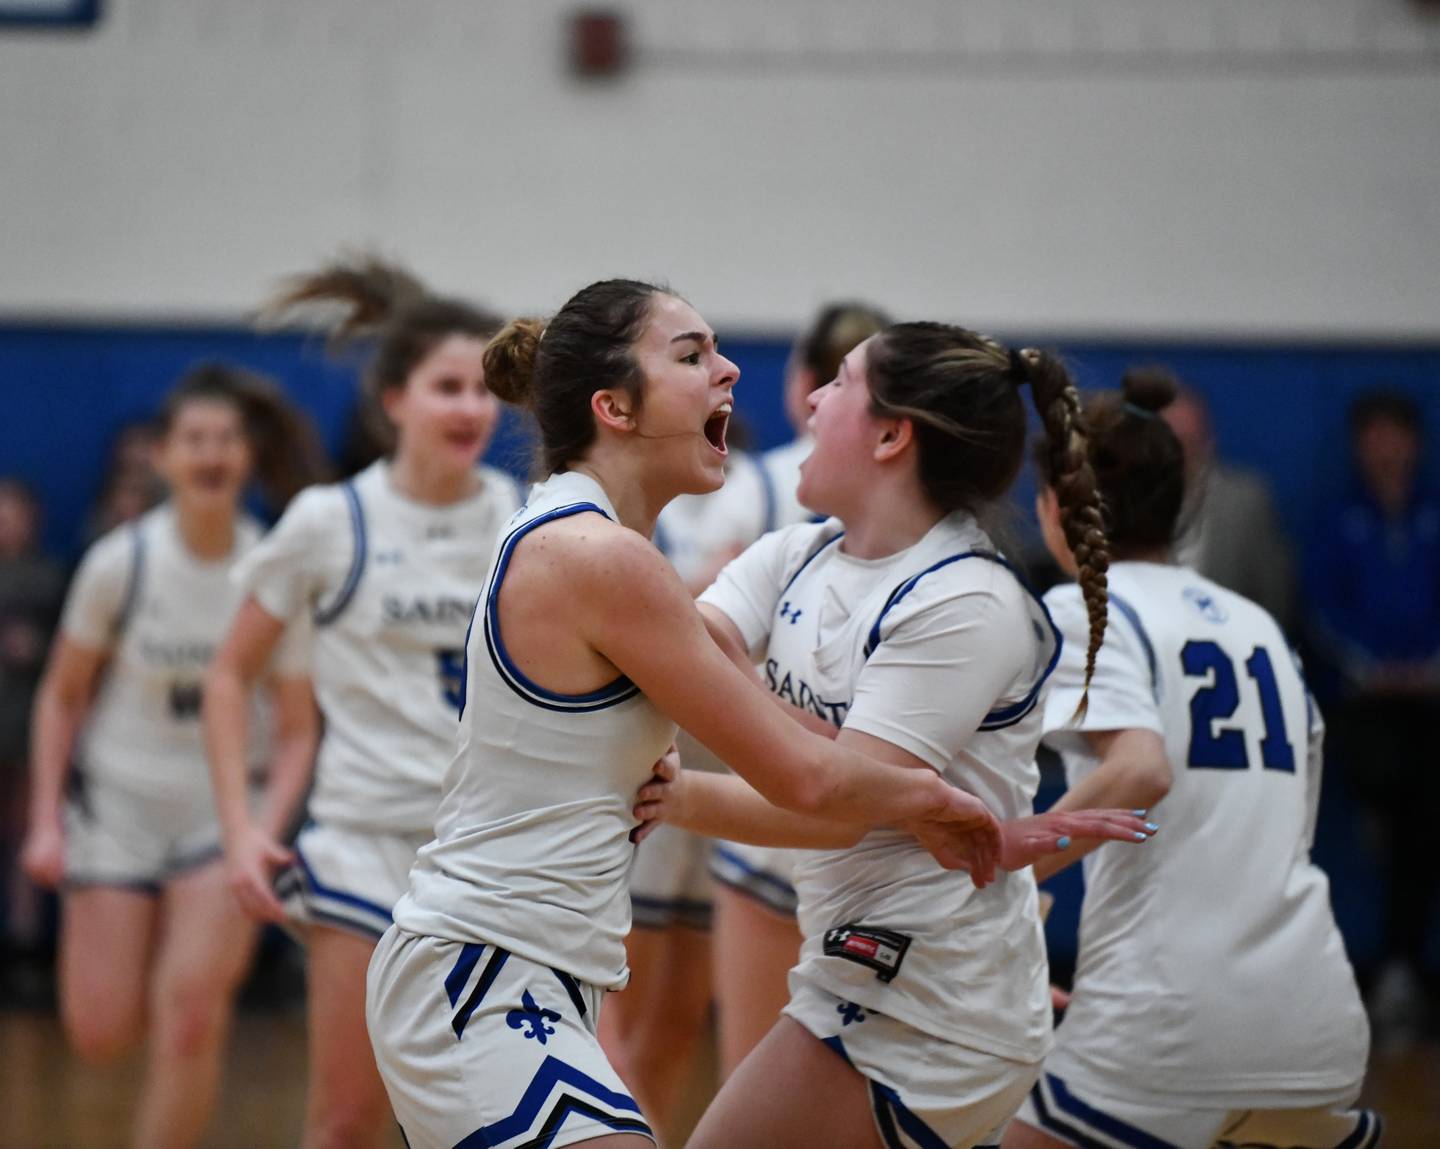 Bailey Harris (left) exults in jubilation with Baily Walden after St. Mary's girls basketball team's victory over Concordia Prep Thursday evening. The undefeated and No. 8 Saints advanced to the IAAM B Conference championship game with a come-from-behind semifinal victory in Annapolis.